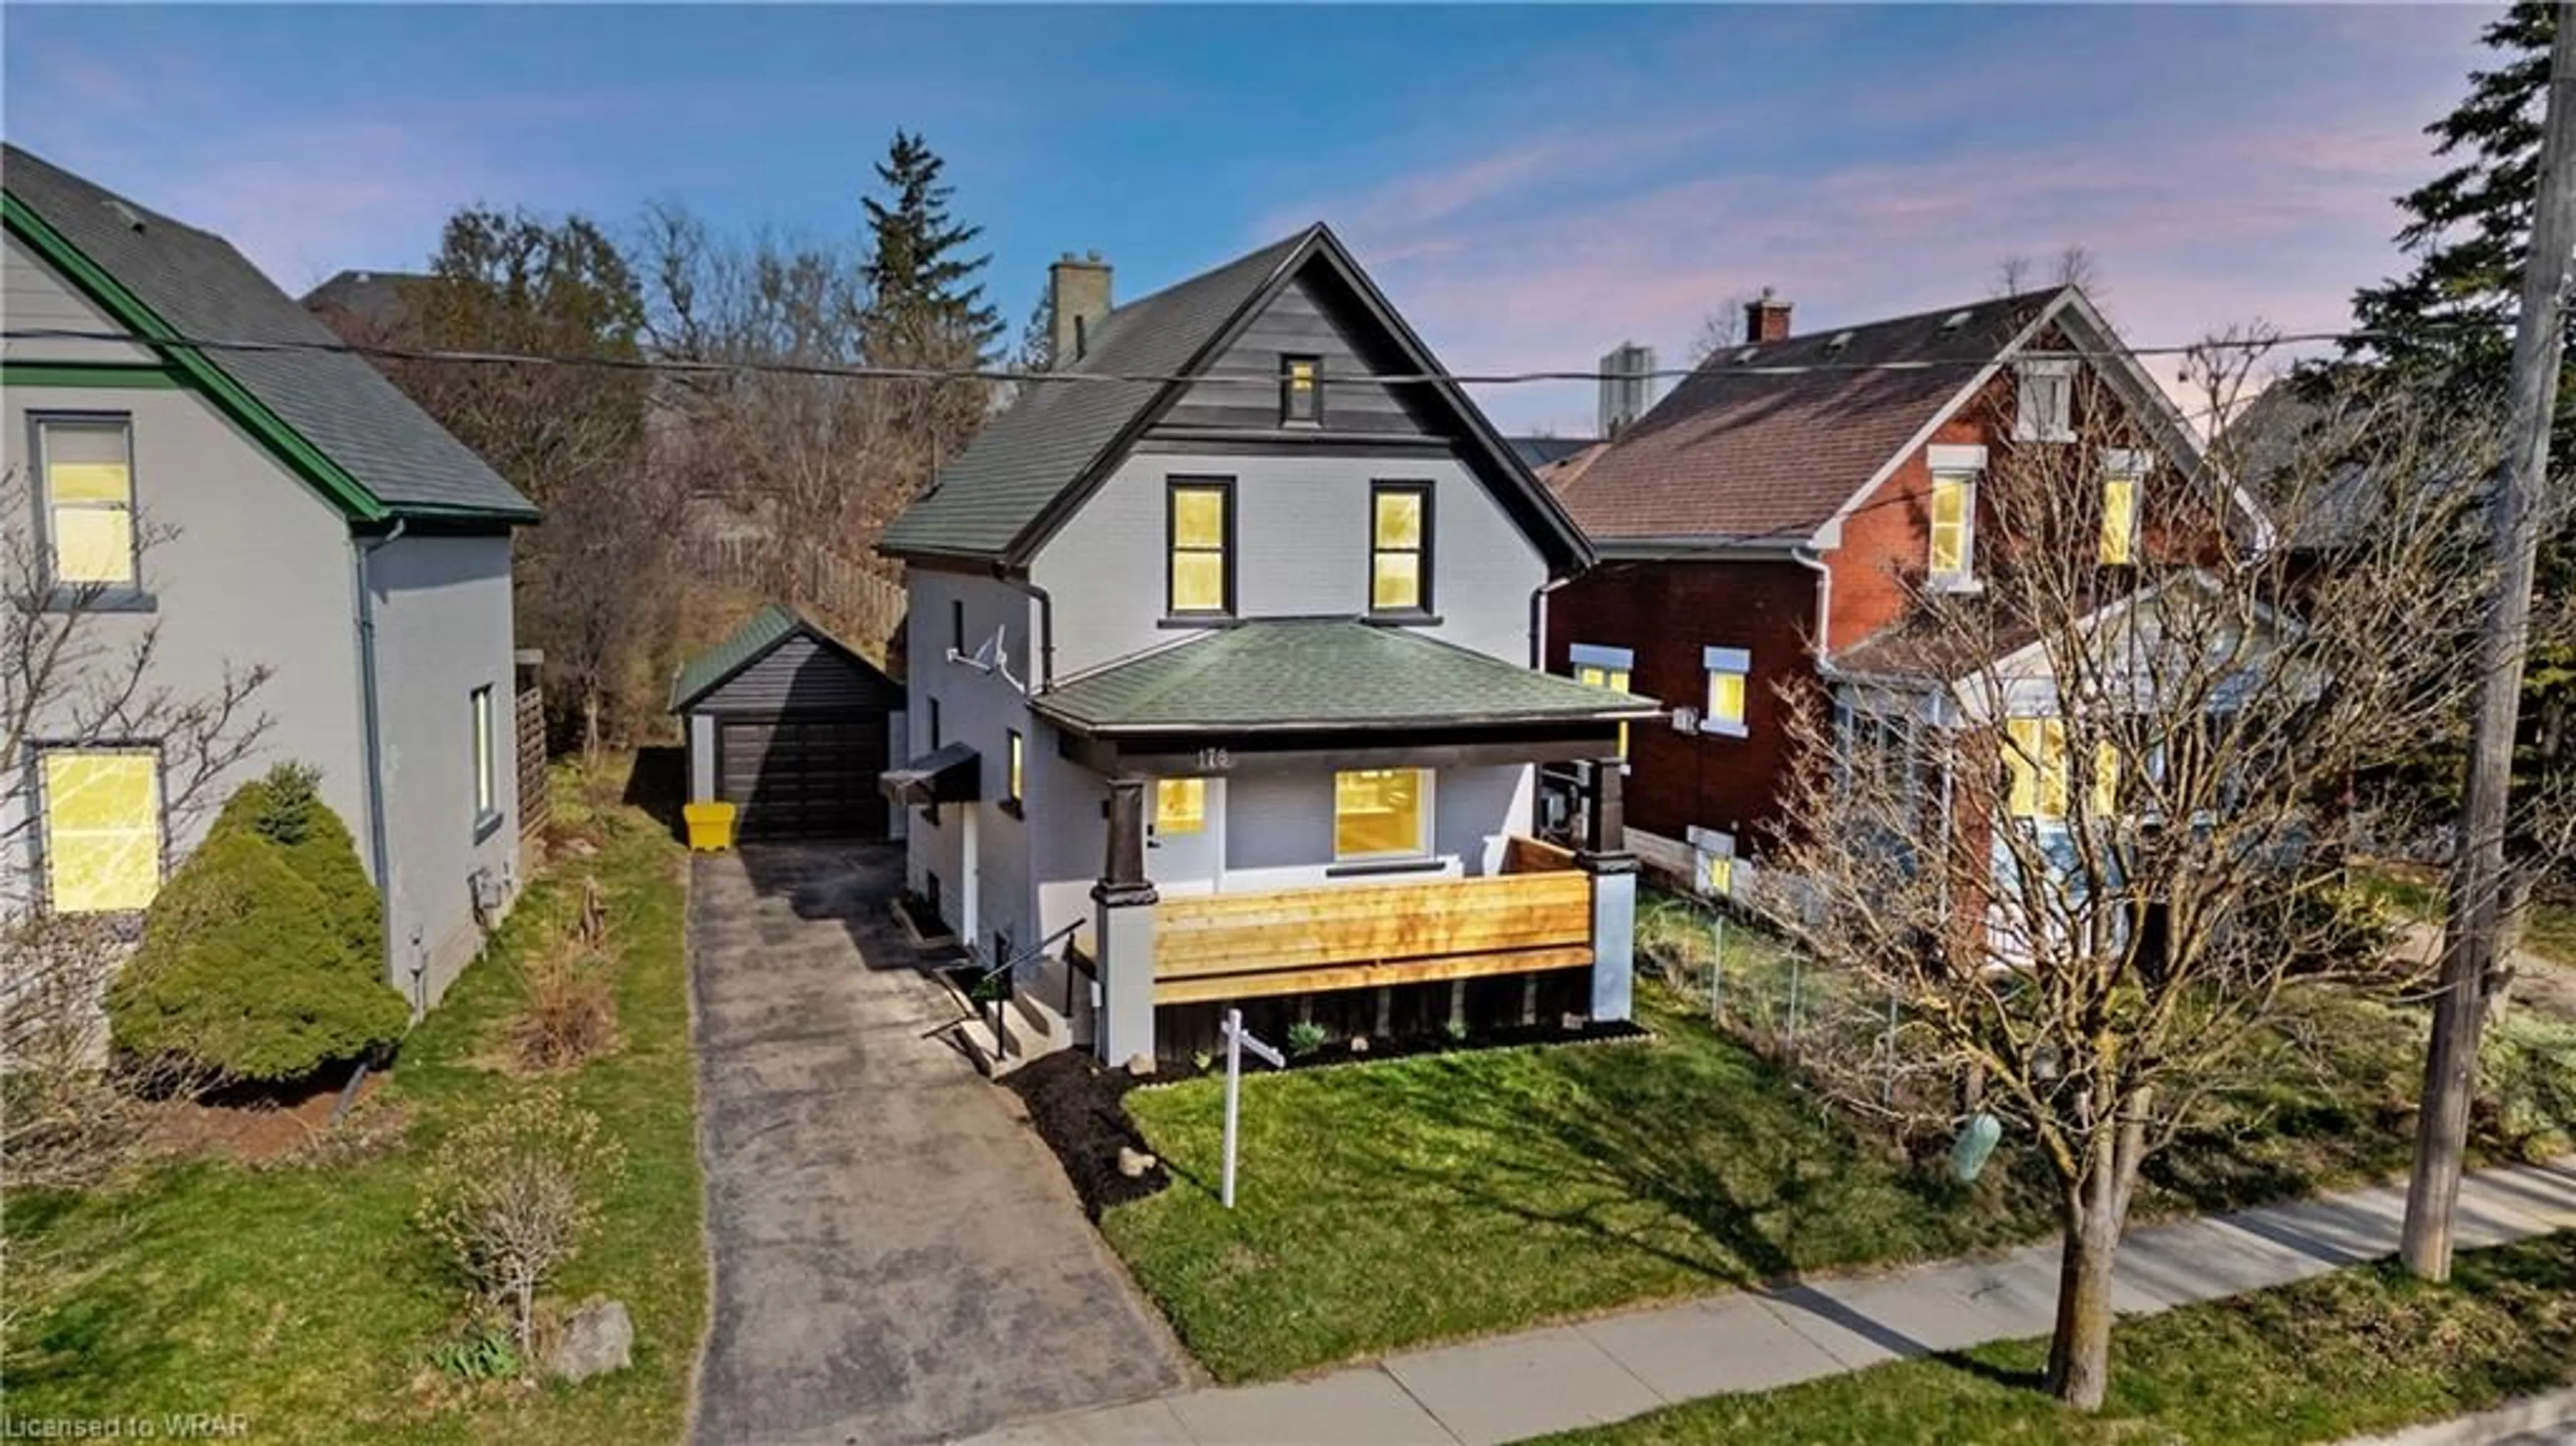 Frontside or backside of a home for 178 Kent Ave, Kitchener Ontario N2G 3R3